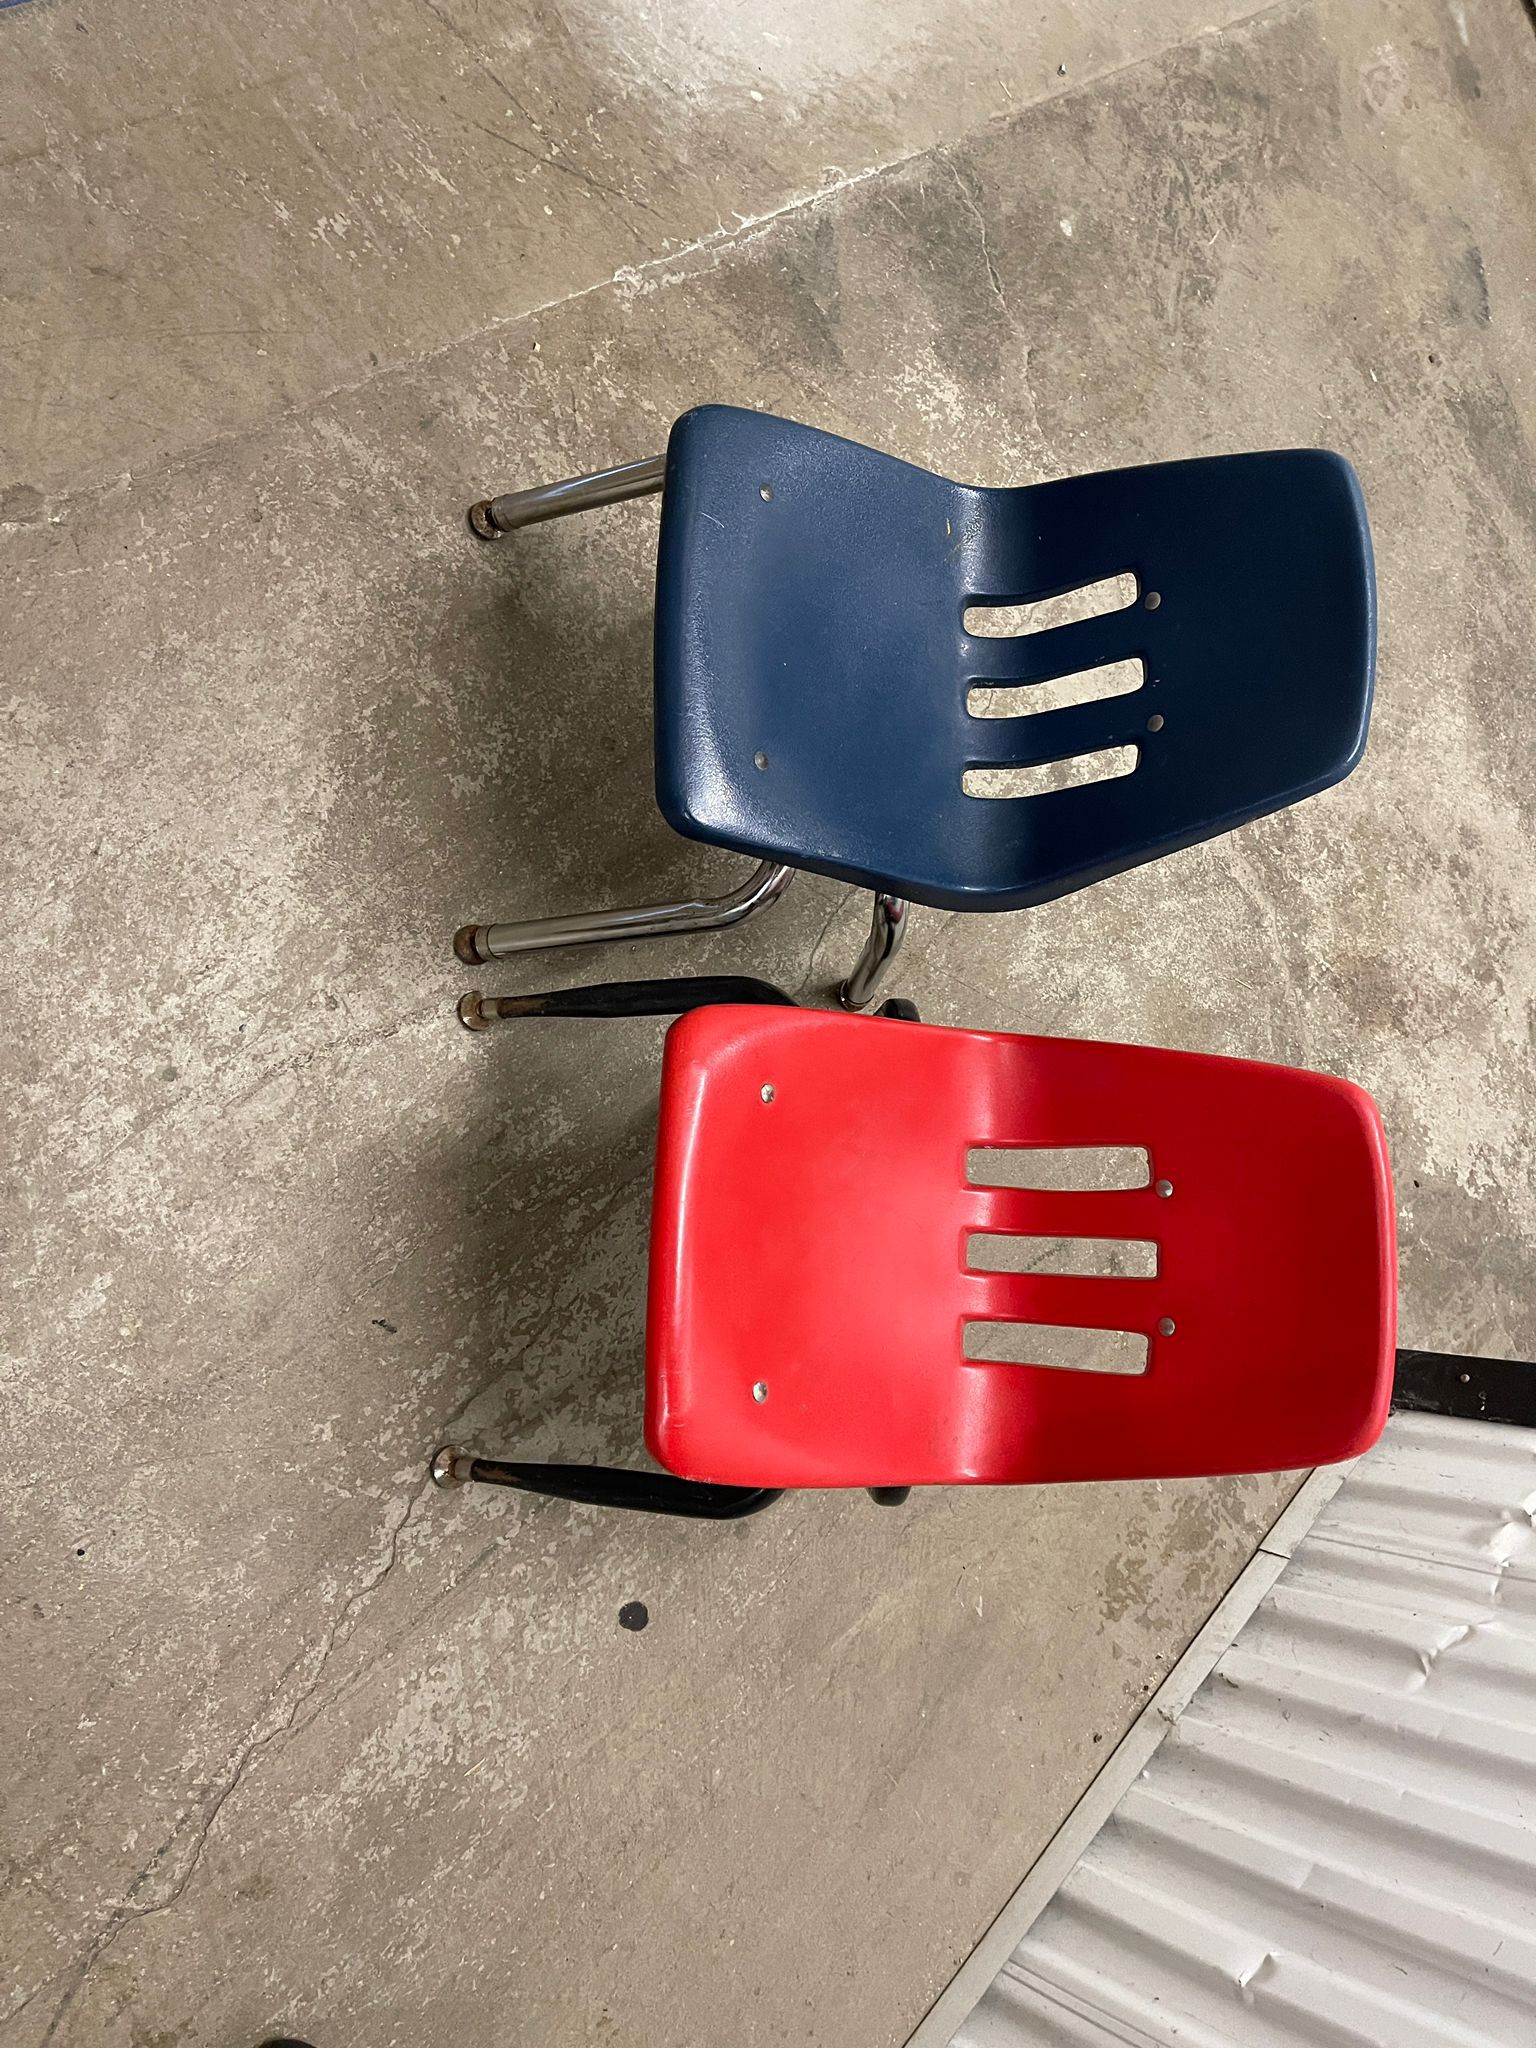 Virco  Student Chairs For Kids